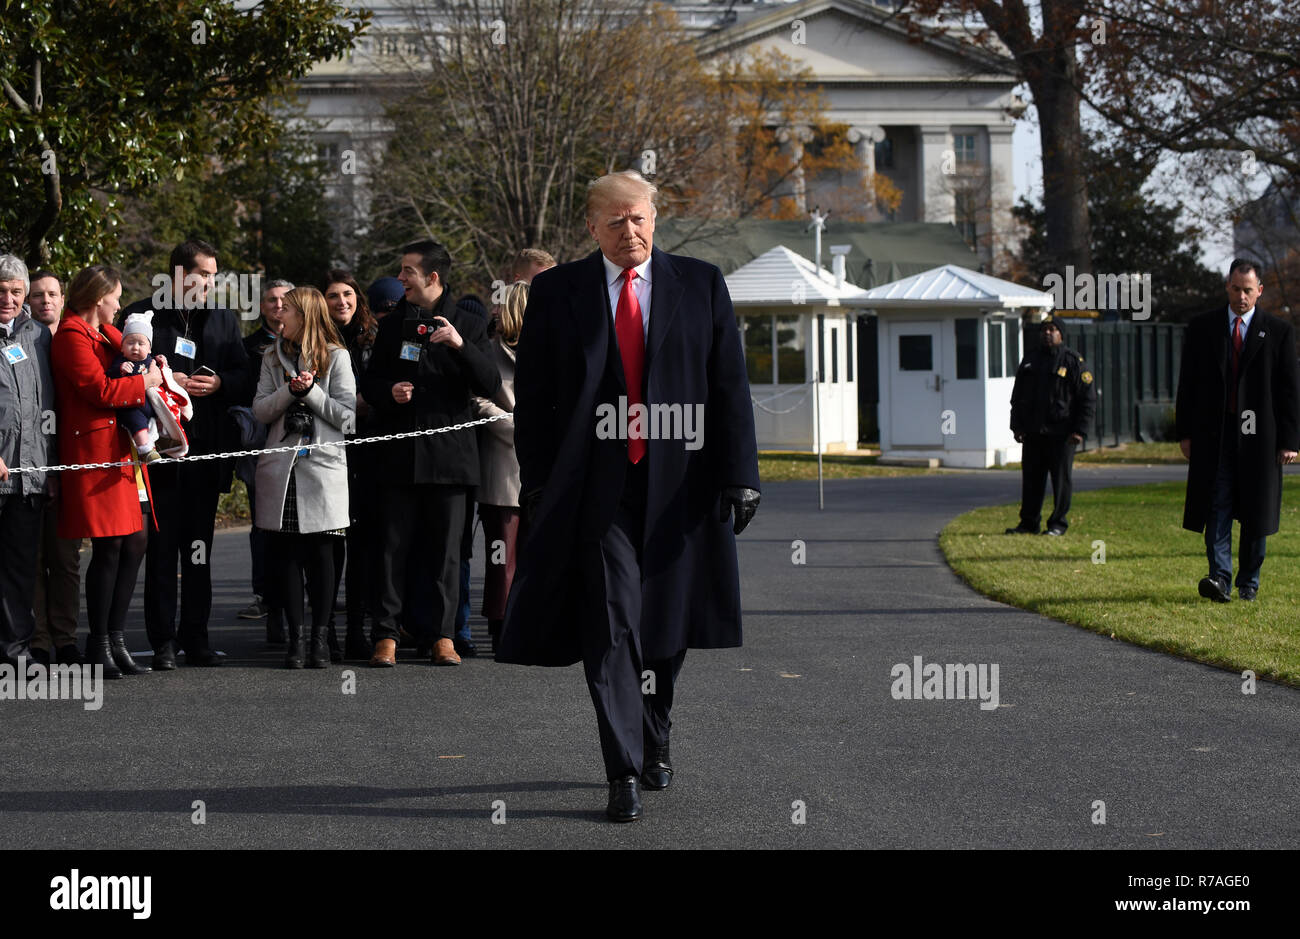 Washington, DC. 8th Dec, 2018. United States President Donald J. Trump walks towards the press while departing the White House December 8, 2018 in Washington, DC. Trump announced White House Chief of Staff John Kelly will resign by the end of the year before departing for the 119th Army-Navy Football Game in Philadelphia, Pennsylvania. Credit: Olivier Douliery/Pool via CNP | usage worldwide Credit: dpa/Alamy Live News Stock Photo